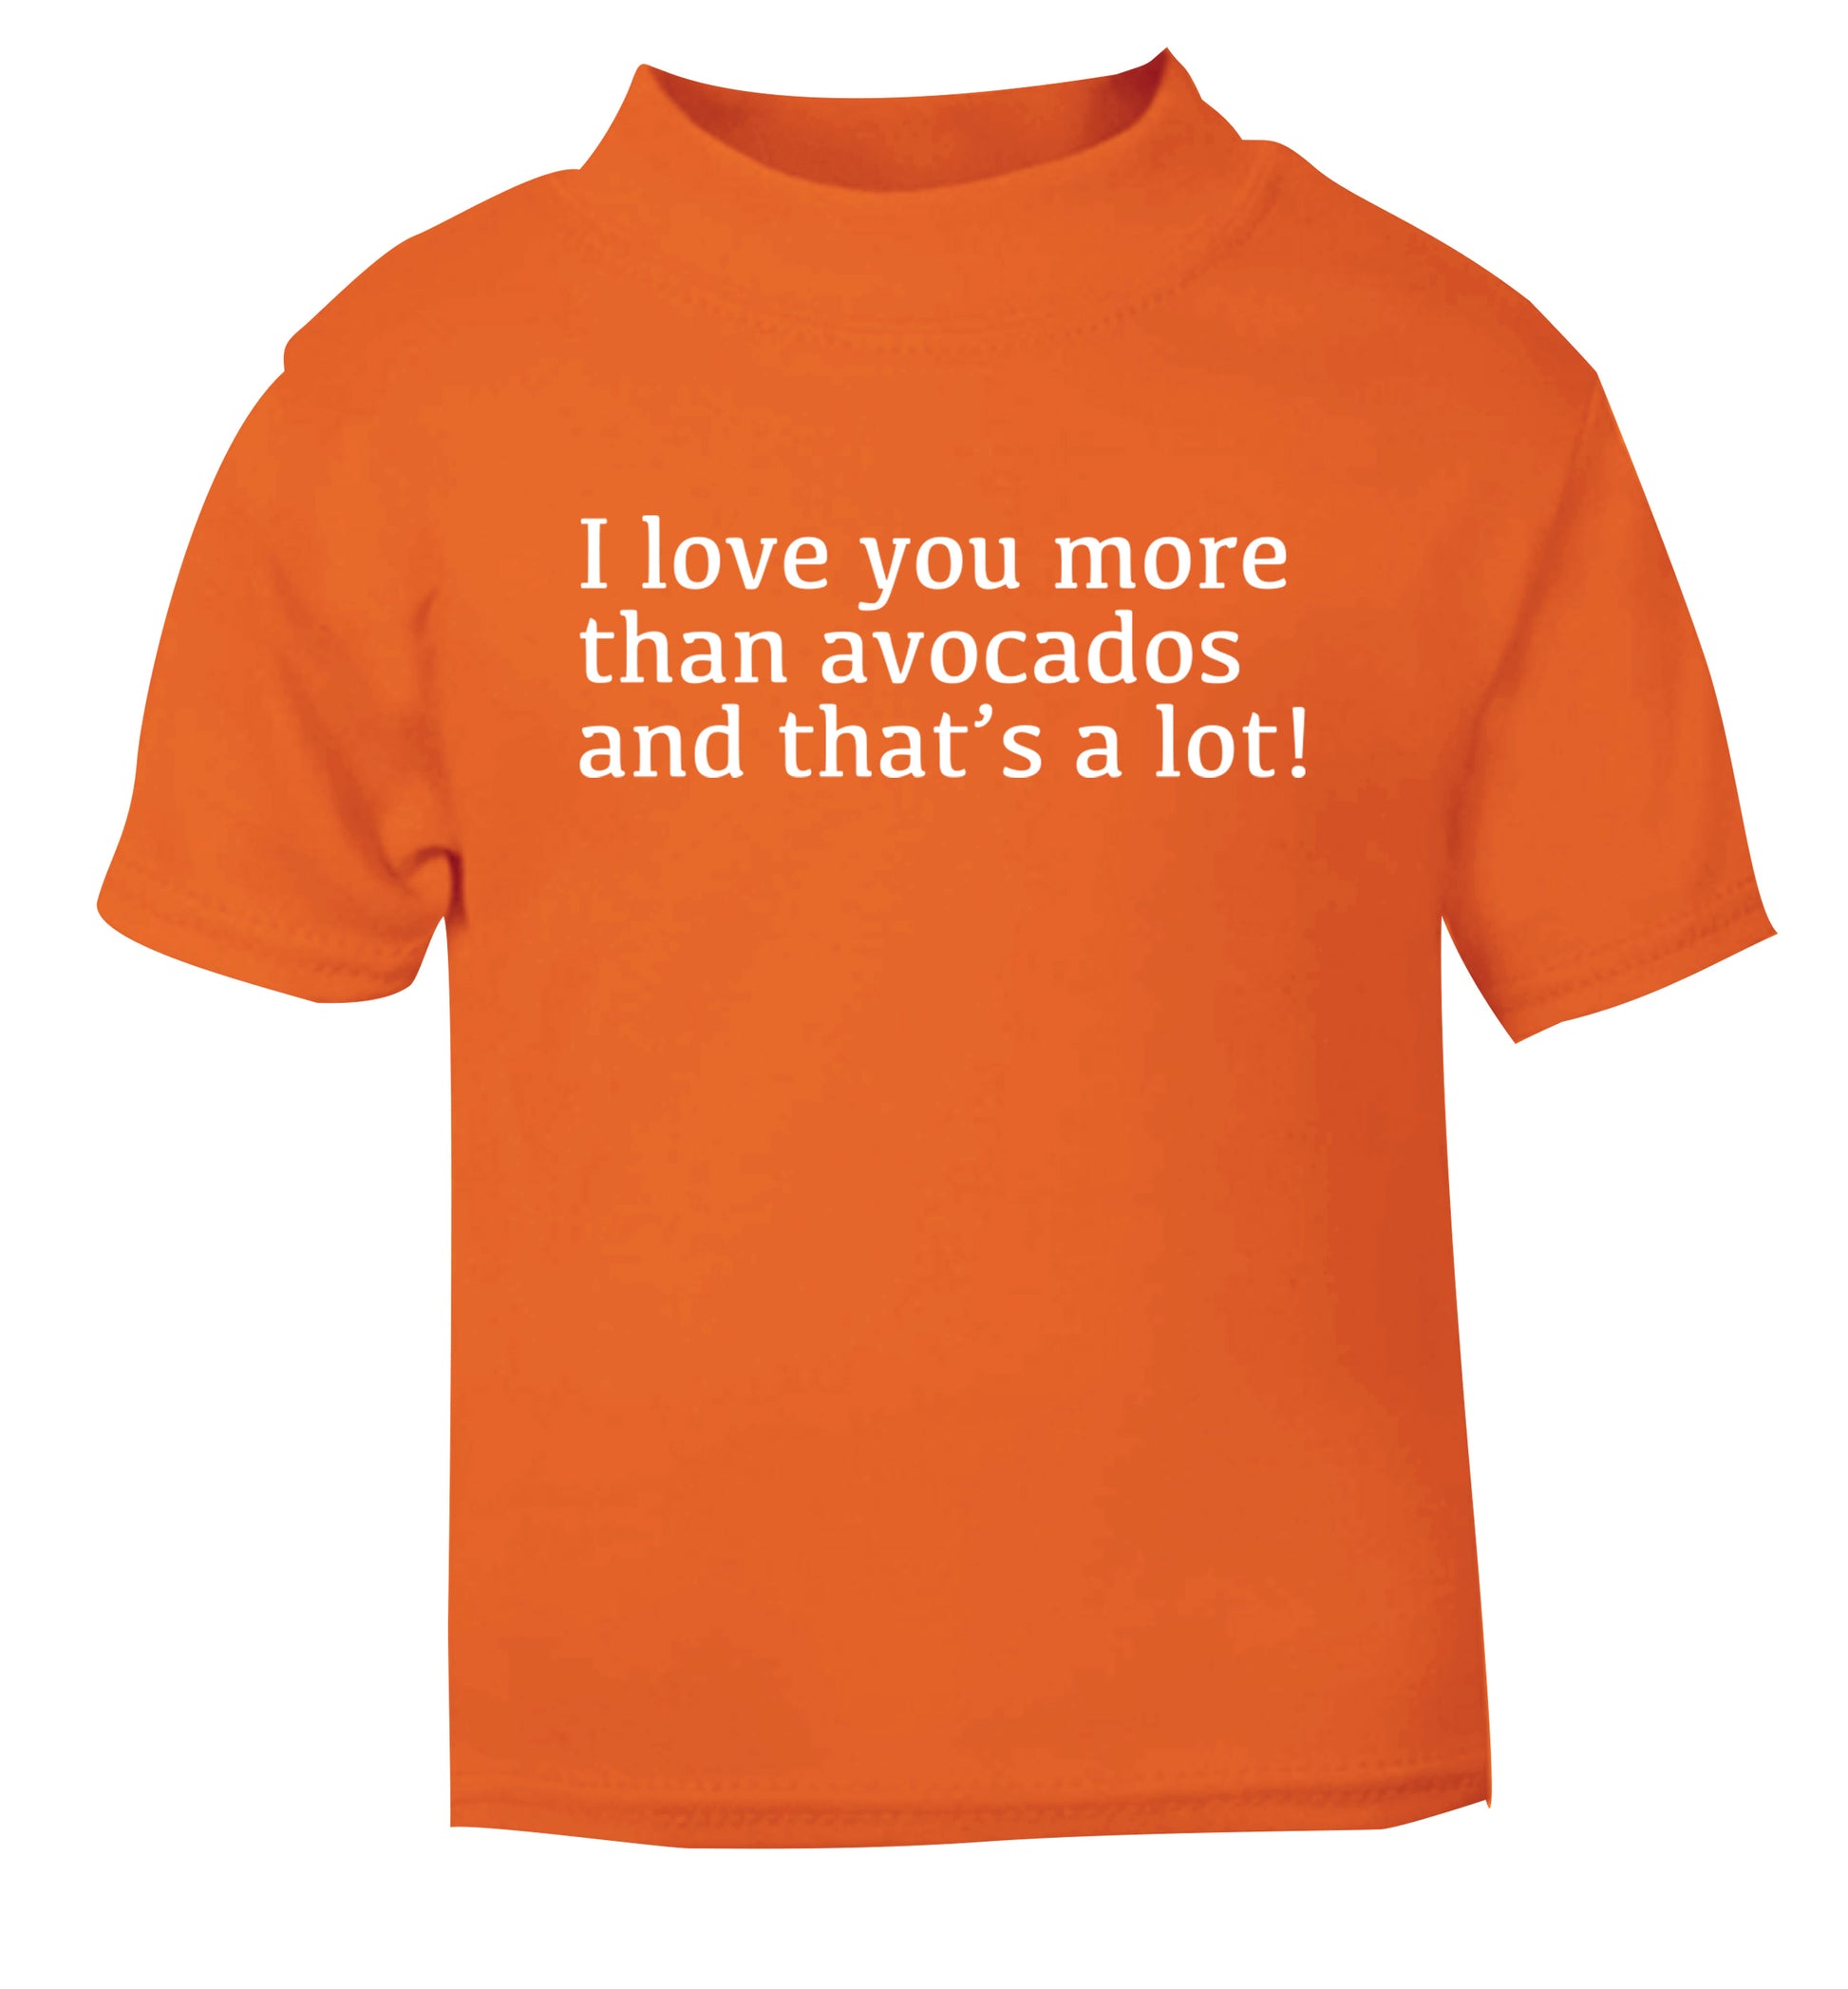 I love you more than avocados and that's a lot orange Baby Toddler Tshirt 2 Years